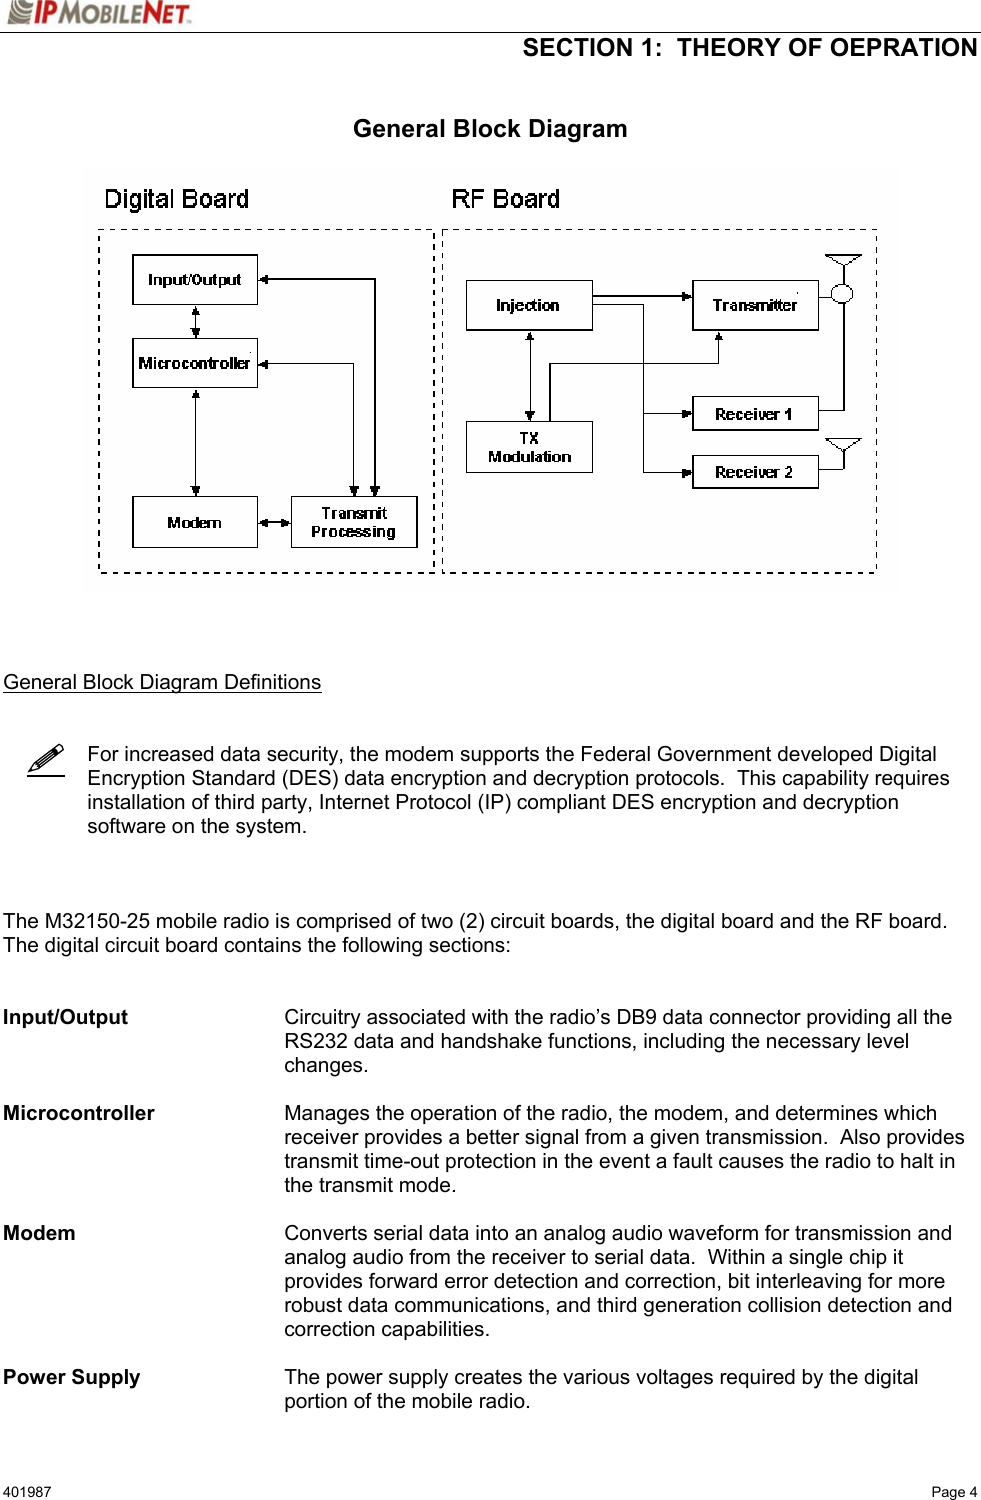   SECTION 1:  THEORY OF OEPRATION  401987   Page 4    General Block Diagram      General Block Diagram Definitions       For increased data security, the modem supports the Federal Government developed Digital Encryption Standard (DES) data encryption and decryption protocols.  This capability requires installation of third party, Internet Protocol (IP) compliant DES encryption and decryption software on the system.    The M32150-25 mobile radio is comprised of two (2) circuit boards, the digital board and the RF board.  The digital circuit board contains the following sections:   Input/Output  Circuitry associated with the radio’s DB9 data connector providing all the RS232 data and handshake functions, including the necessary level changes.   Microcontroller  Manages the operation of the radio, the modem, and determines which receiver provides a better signal from a given transmission.  Also provides transmit time-out protection in the event a fault causes the radio to halt in the transmit mode.  Modem  Converts serial data into an analog audio waveform for transmission and analog audio from the receiver to serial data.  Within a single chip it provides forward error detection and correction, bit interleaving for more robust data communications, and third generation collision detection and correction capabilities.  Power Supply  The power supply creates the various voltages required by the digital portion of the mobile radio.